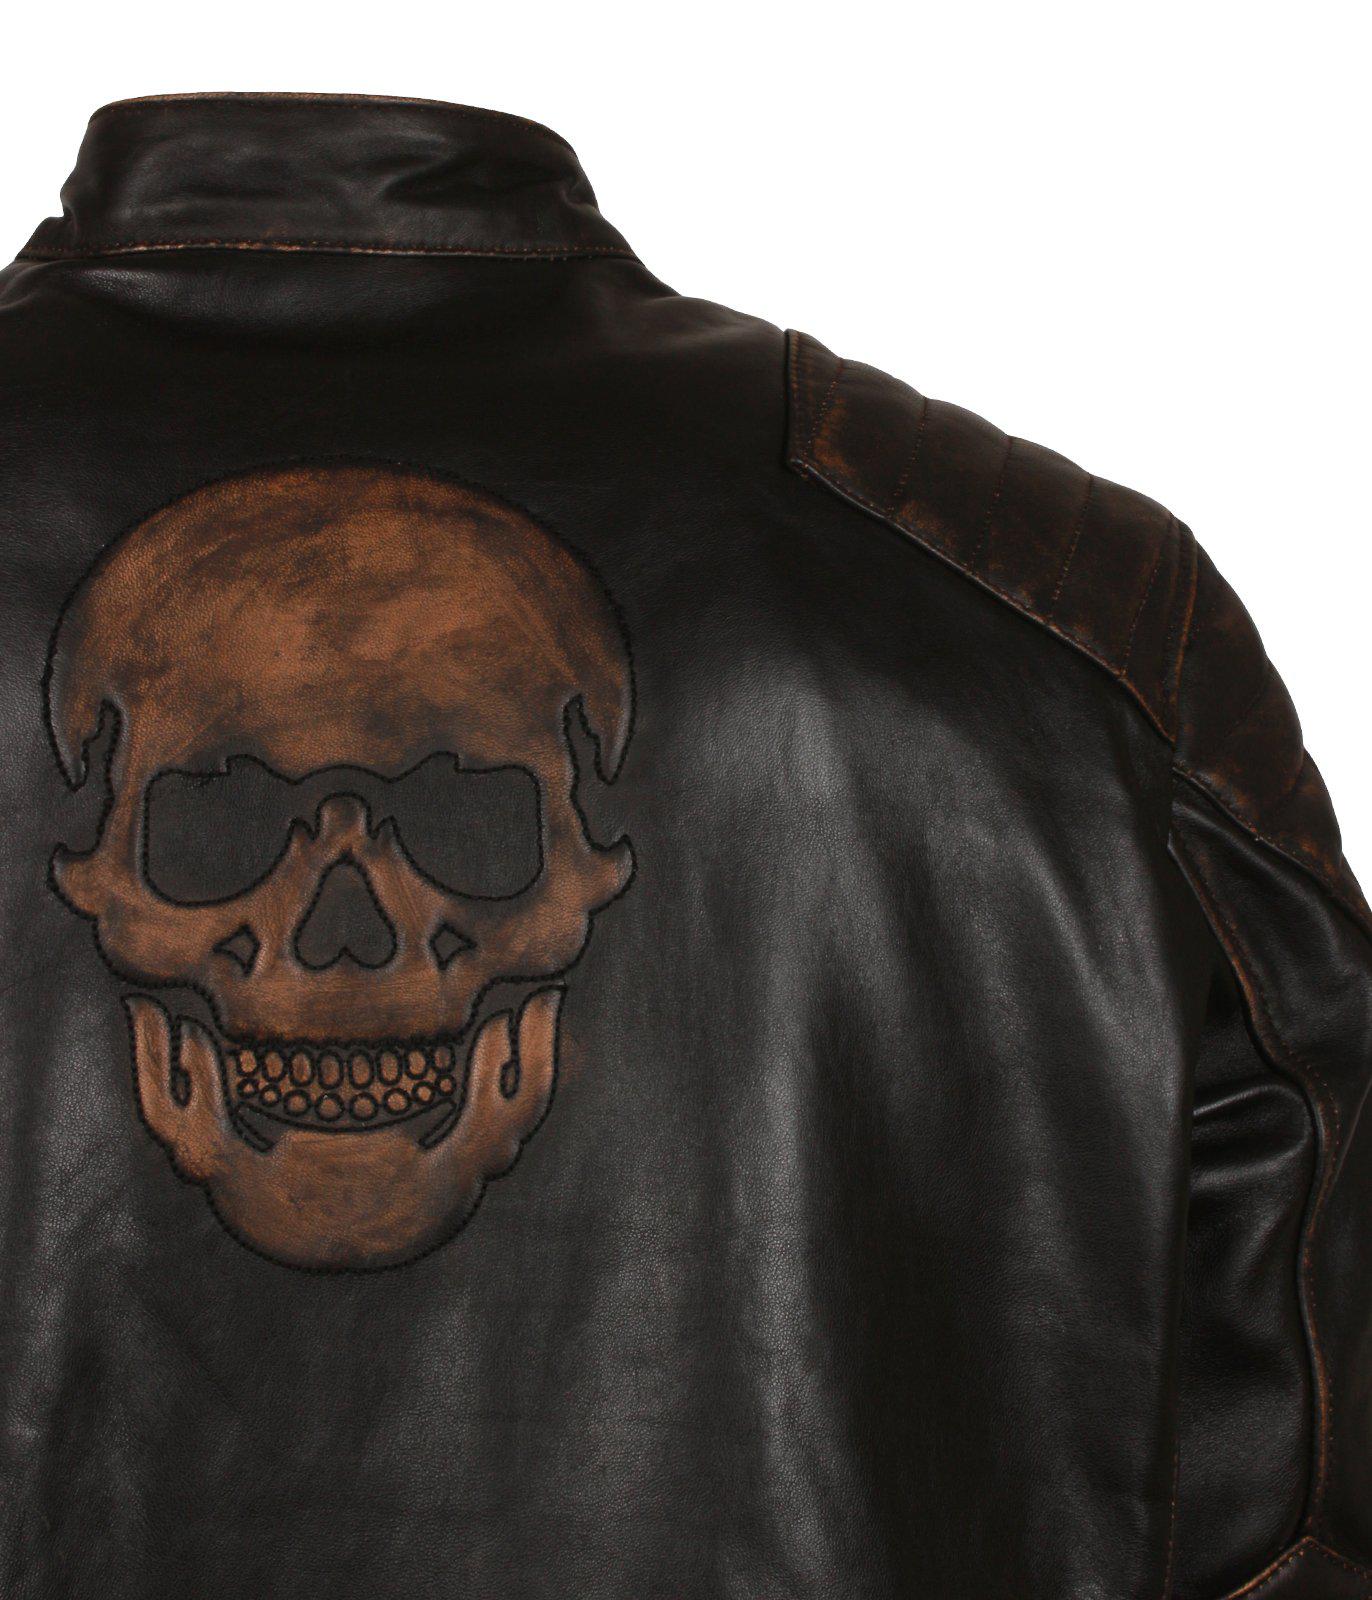 Black Leather Bike Leather Jackets With Skulls, Rivets, And